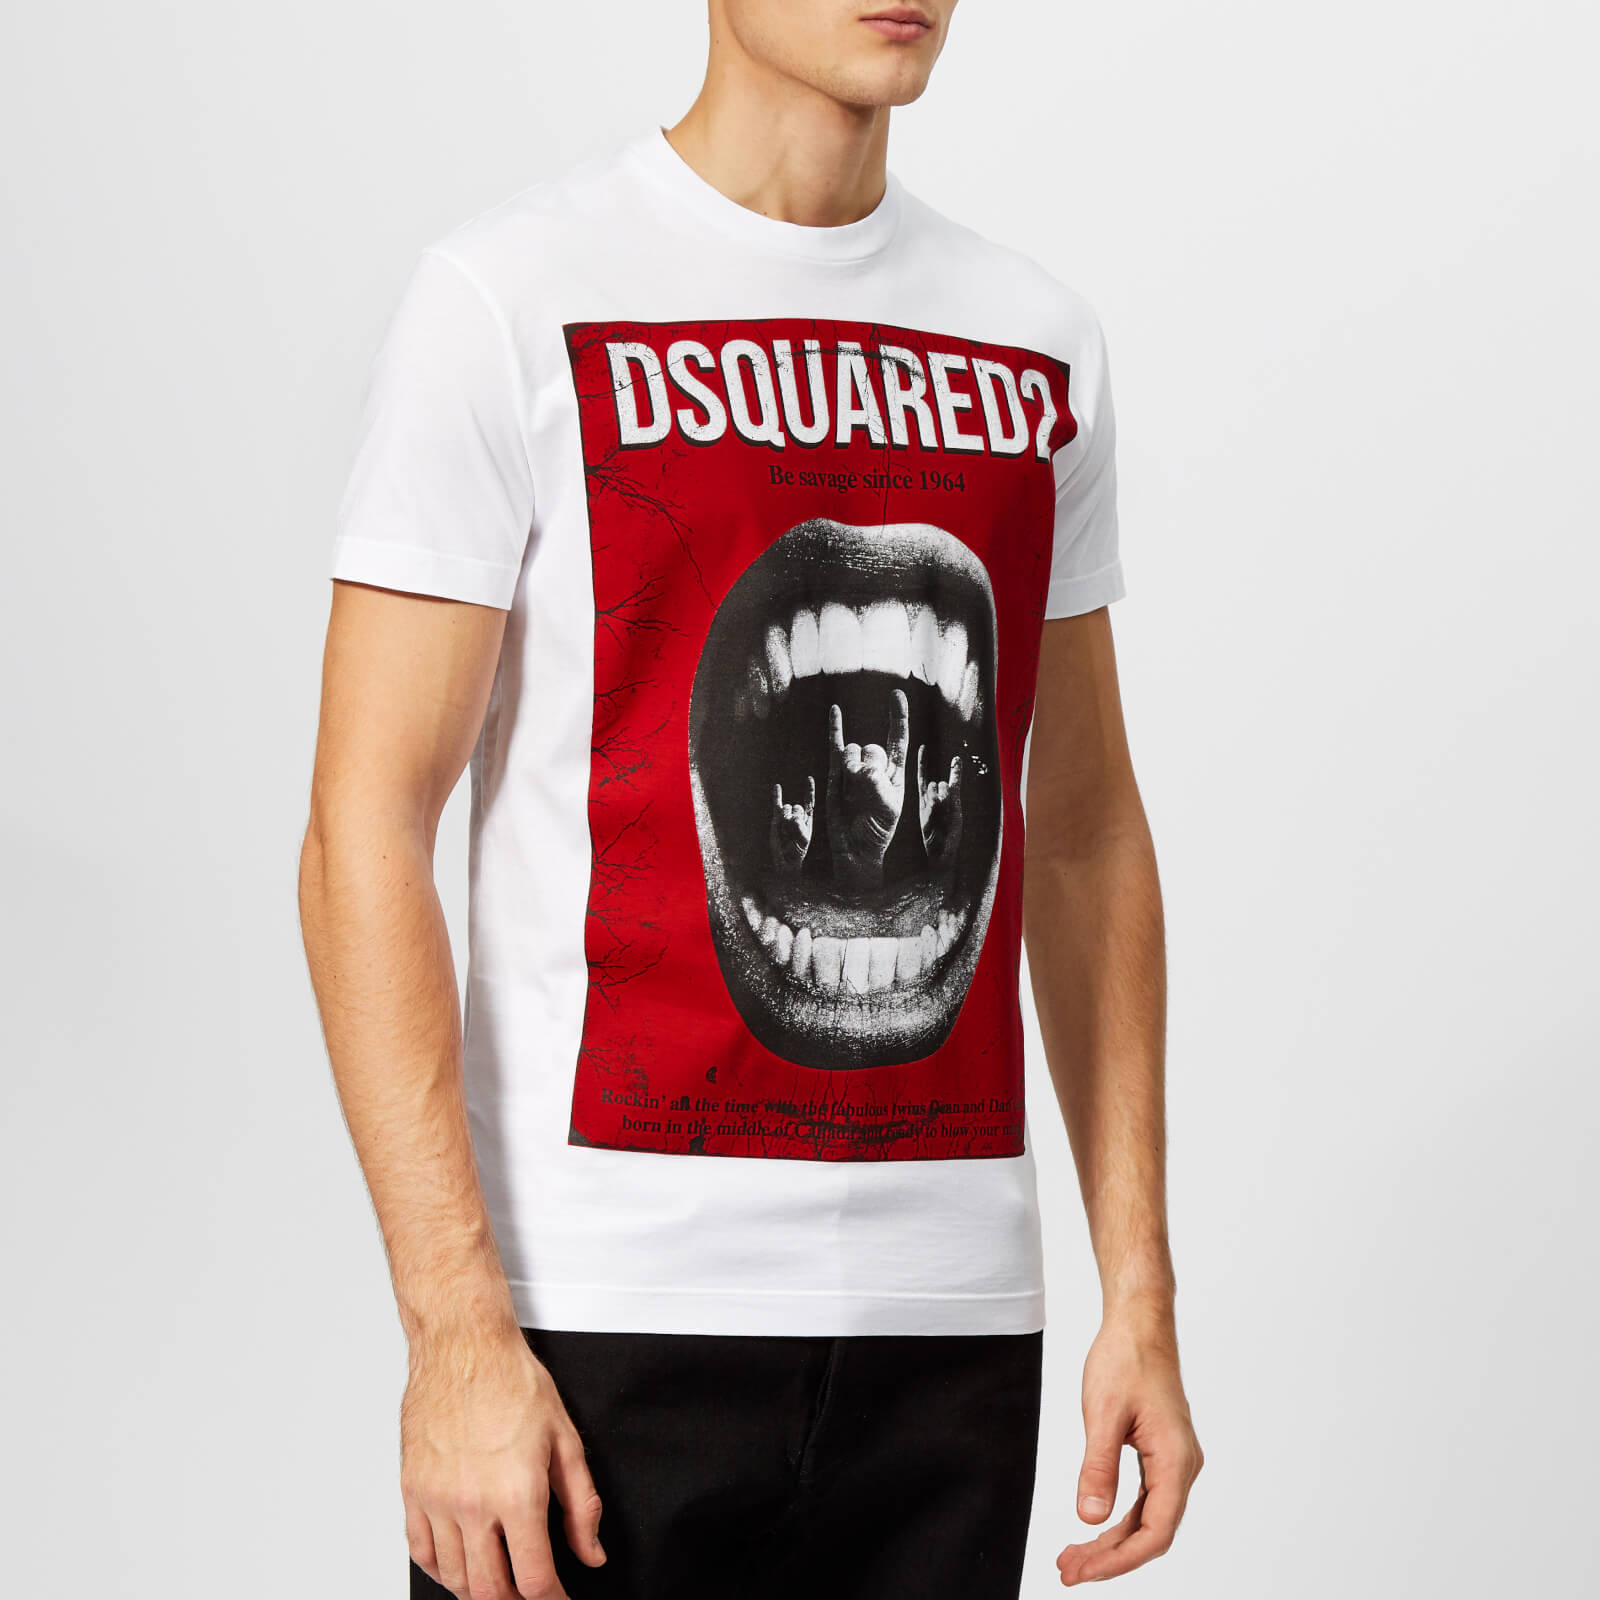 dsquared graphic t shirt